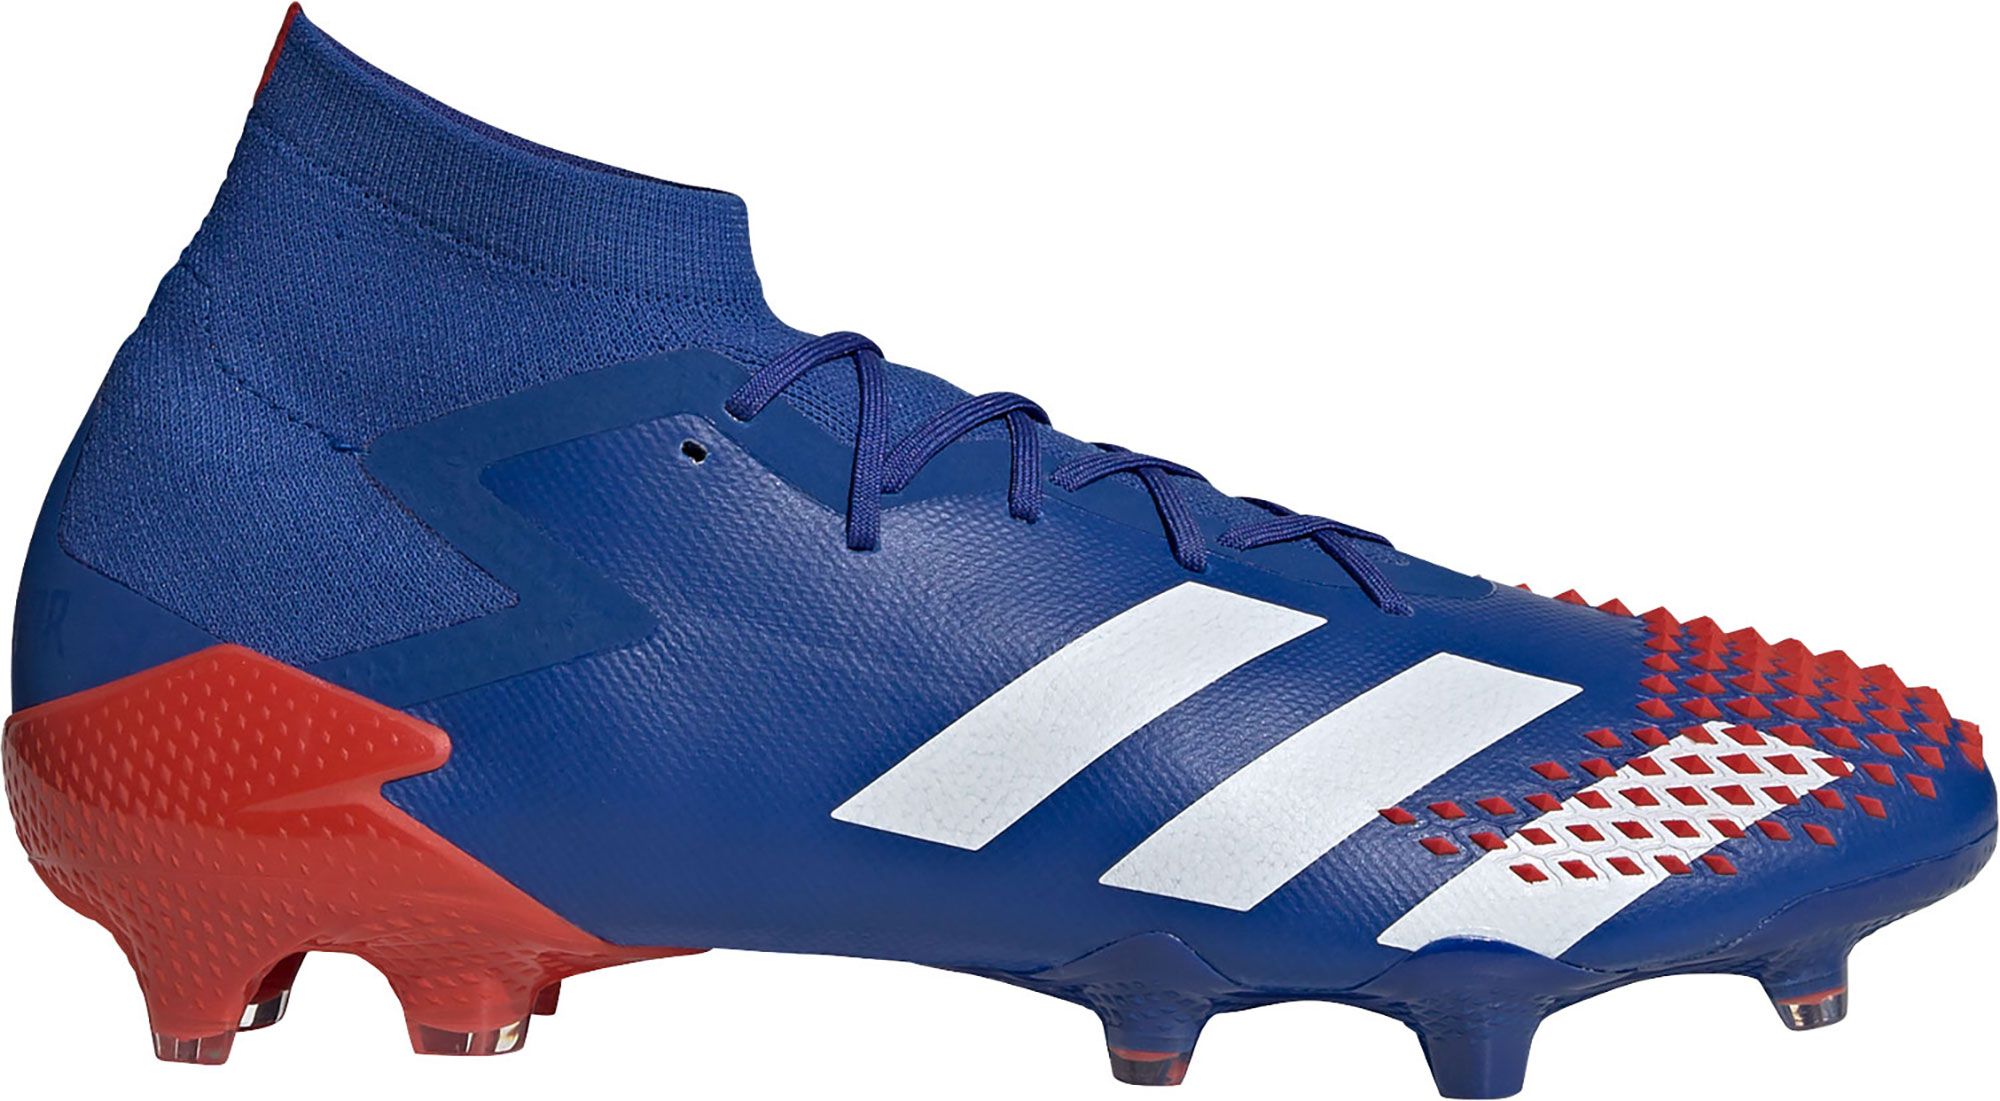 Adidas Soccer Cleats Shoes Best Price Guarantee At Dick S